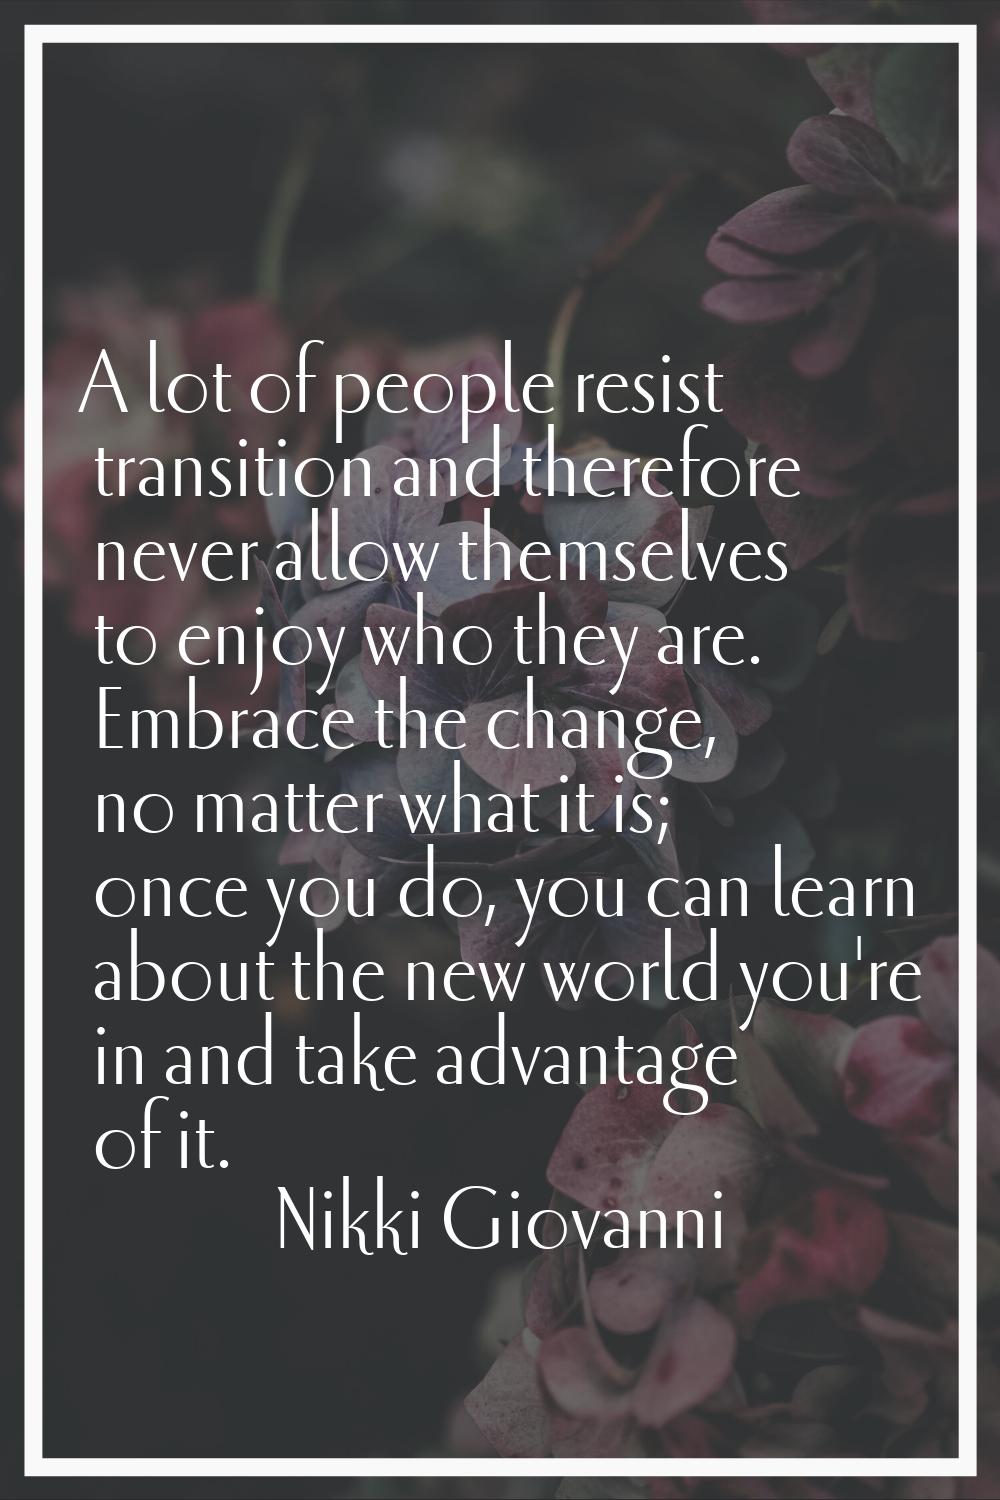 A lot of people resist transition and therefore never allow themselves to enjoy who they are. Embra